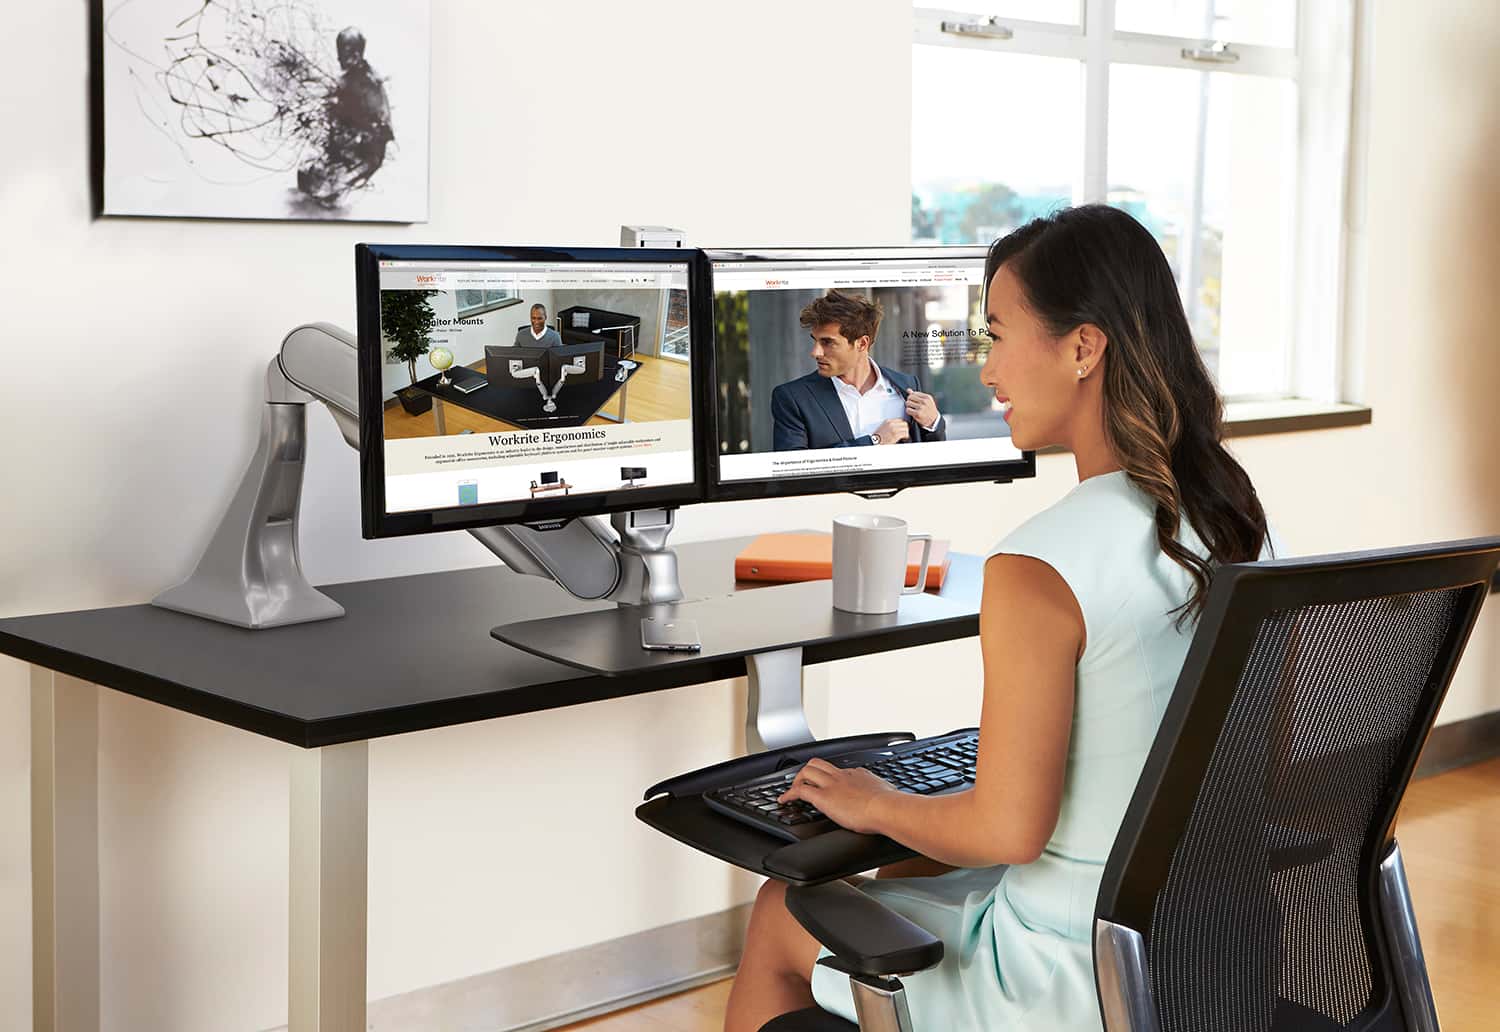 Automated Desk for Work as a New Ergonomic Solution for Improved Efficiency